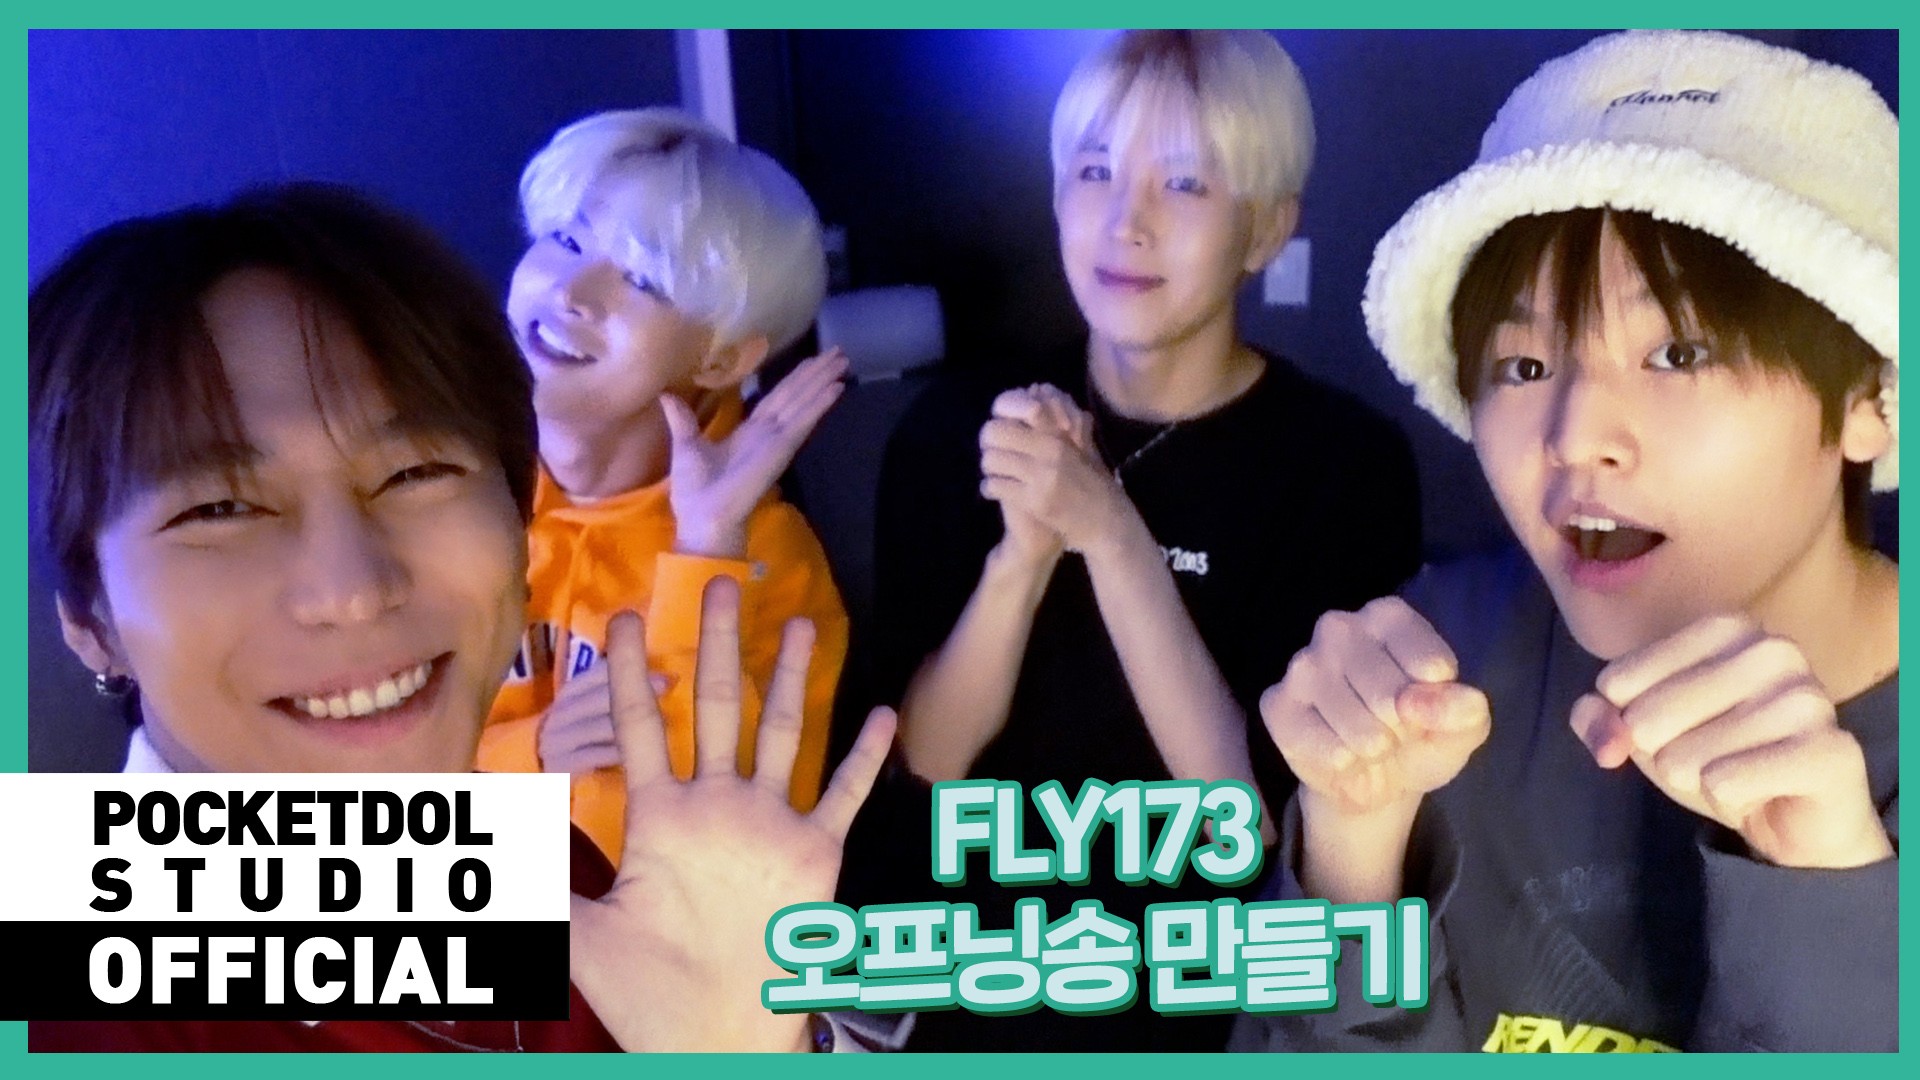 [FLY173] EP.4 FLY173 오프닝송 만들기